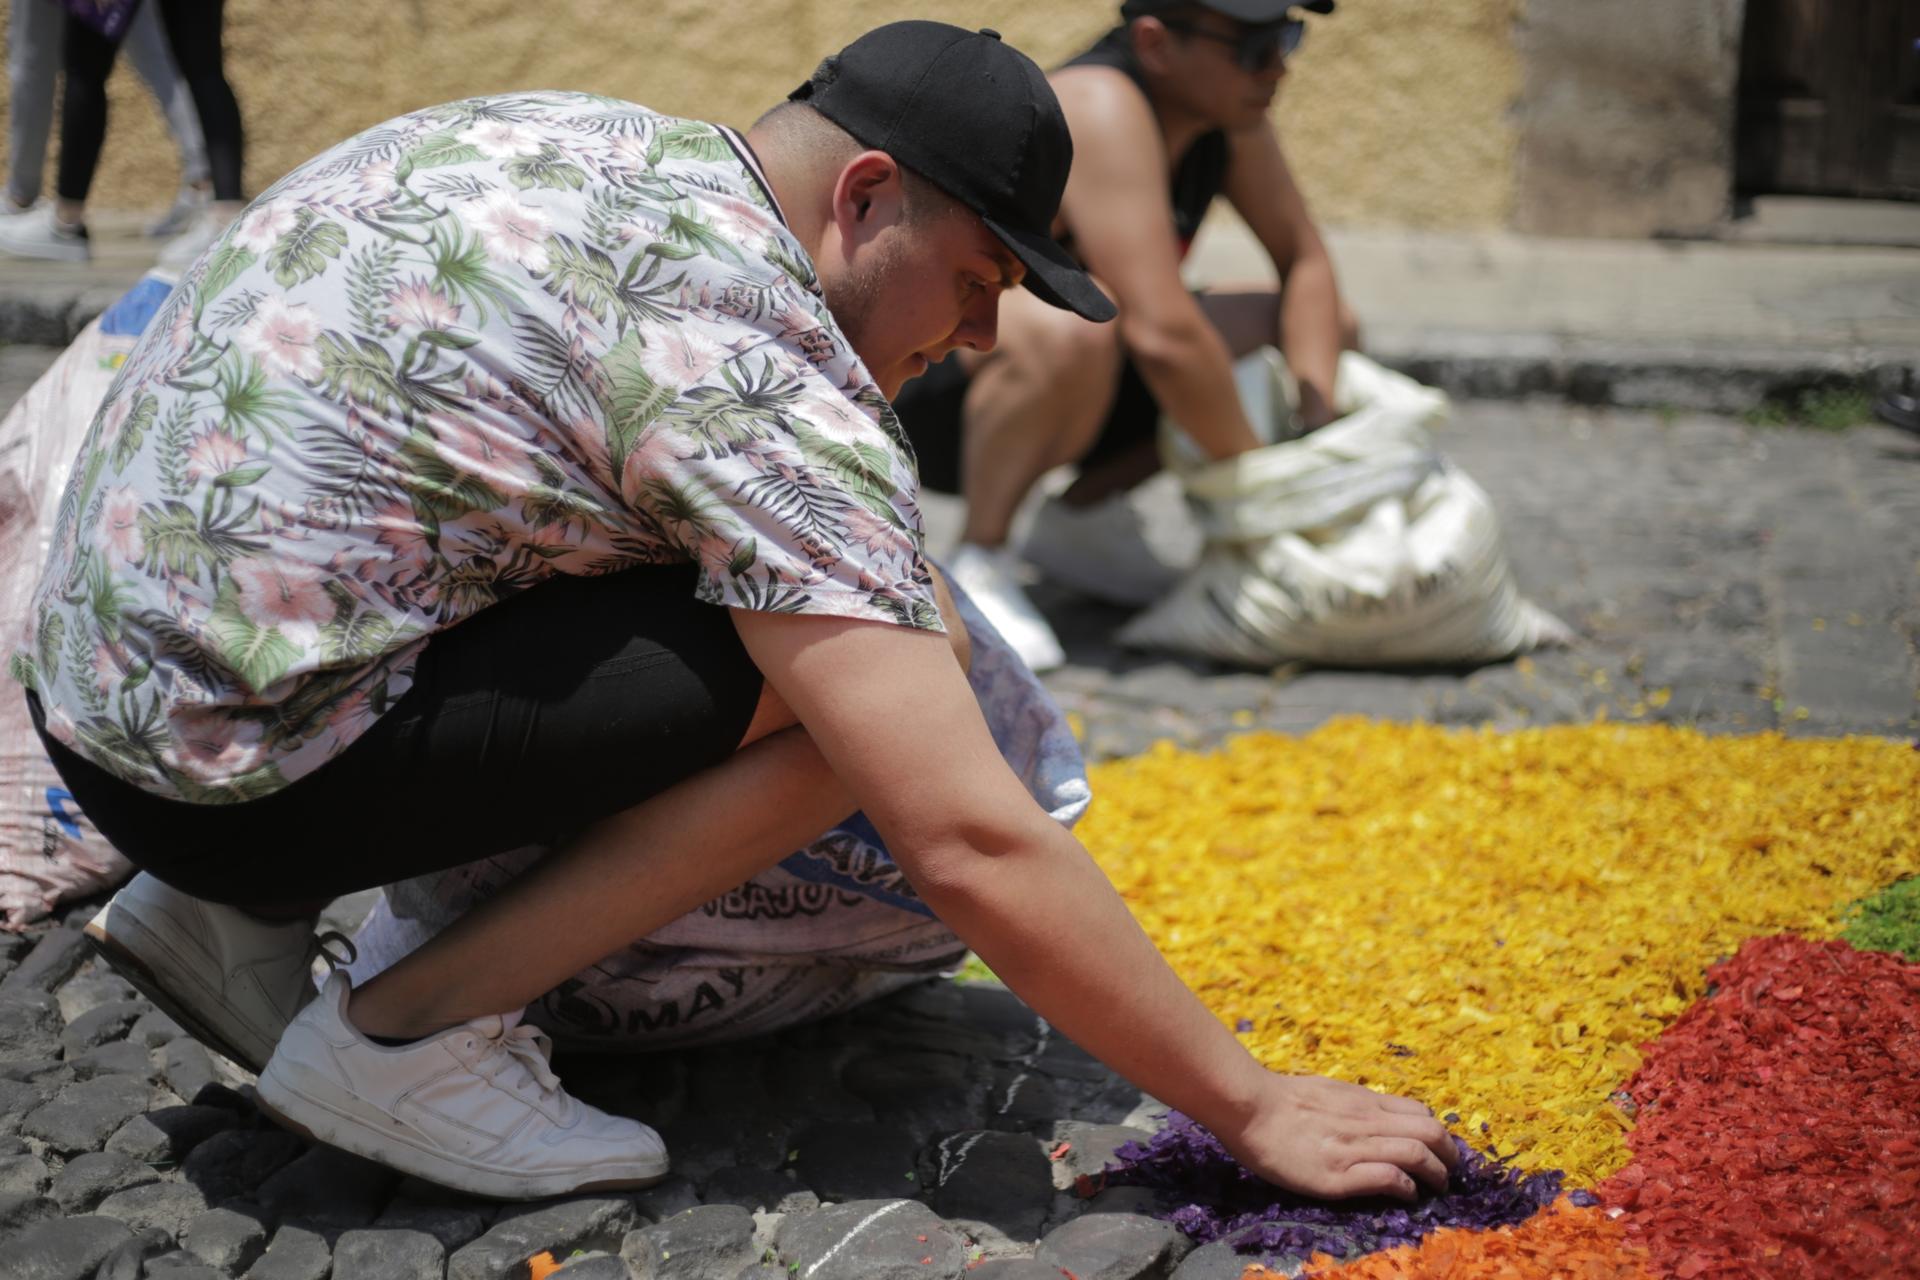 Francisco Orellana works on an alfombra, or street carpet, with his friends for Holy Week, Antigua, Guatemala,